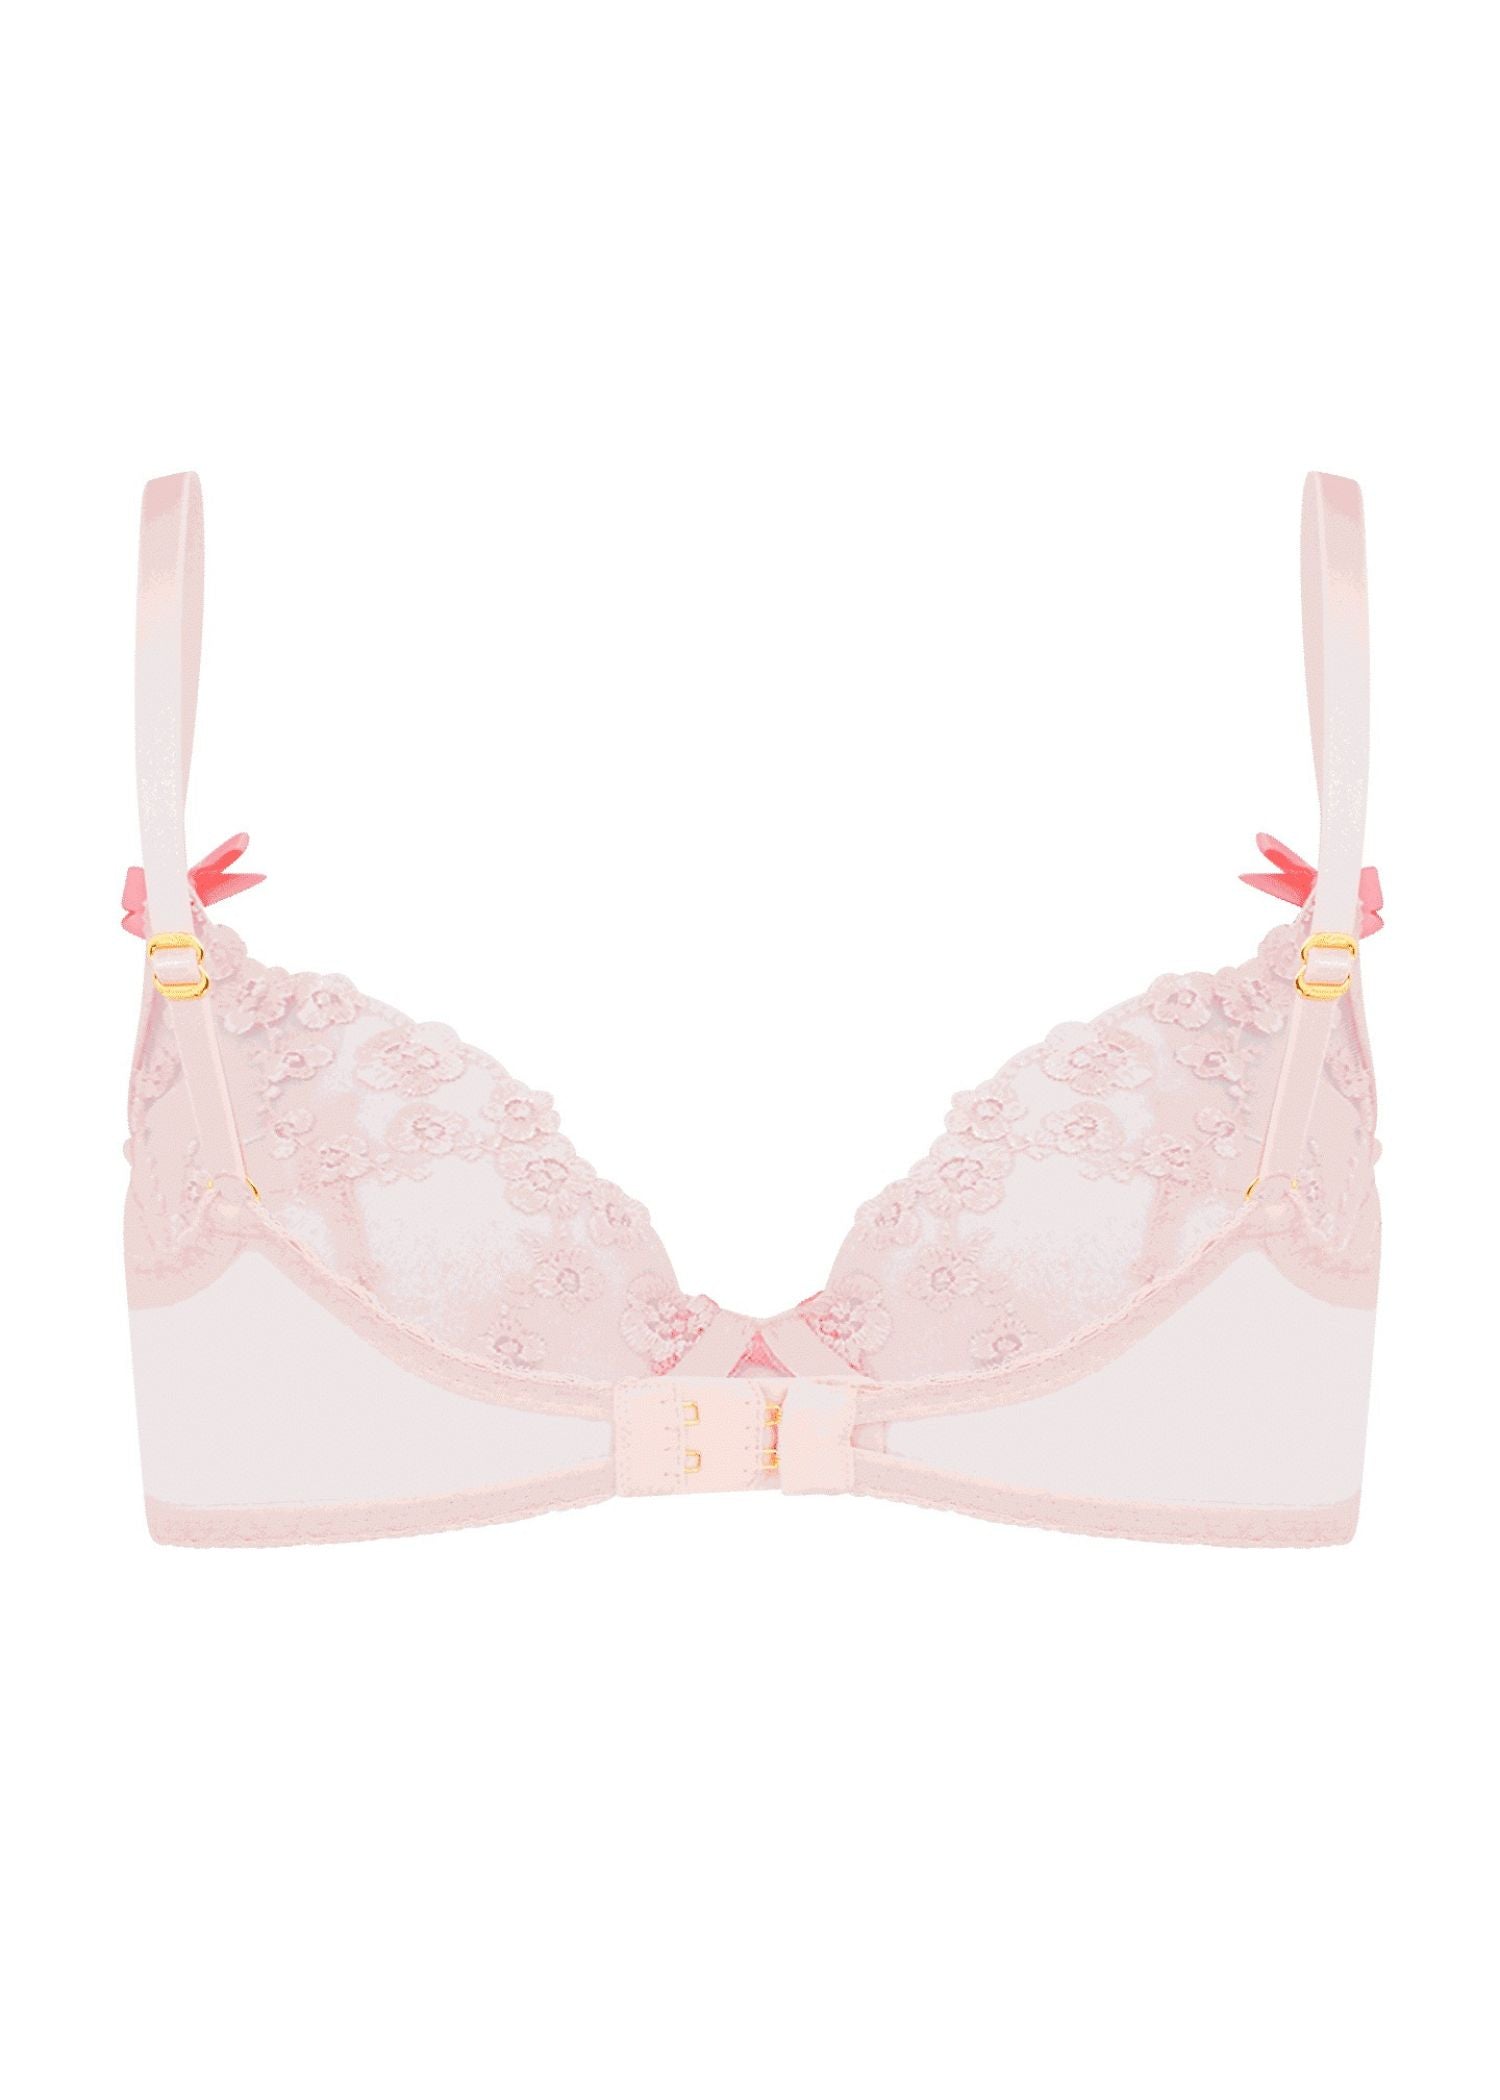 Agent Provocateur Sexy Embroidered Flower Lace Bra - Intimates & Sleepwear